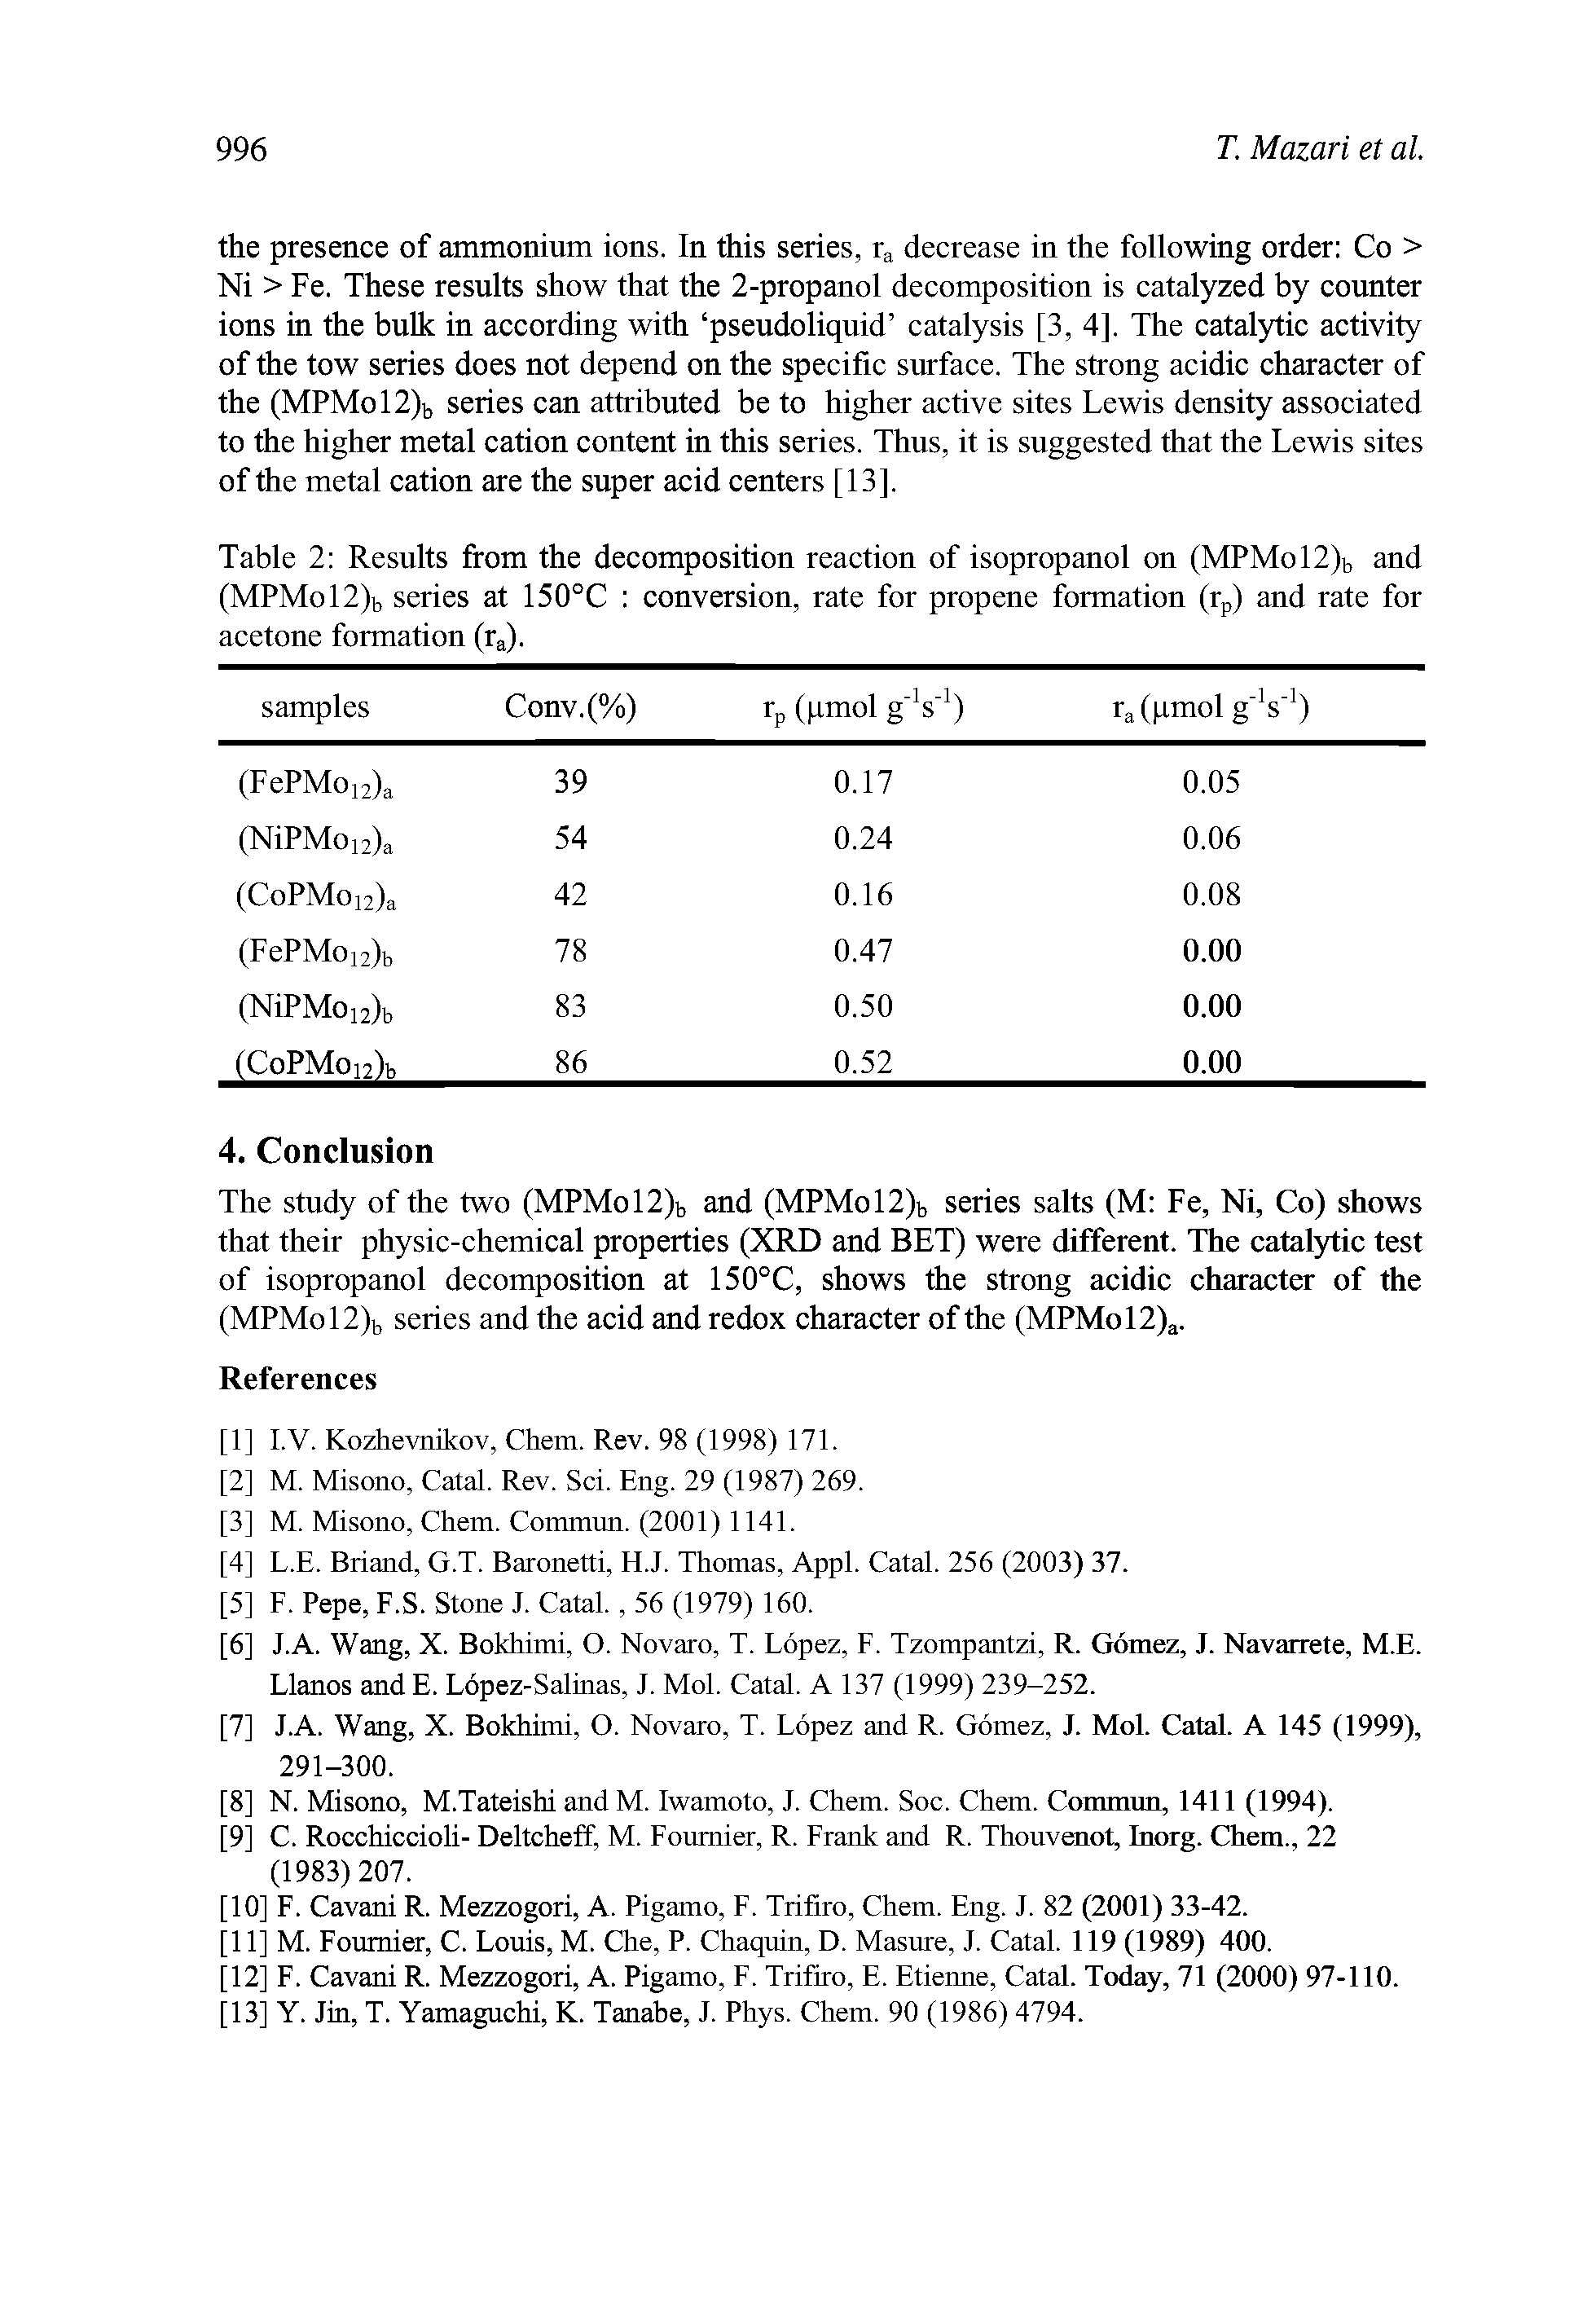 Table 2 Results from the decomposition reaction of isopropanol on (MPMol2)b and (MPMol2)b series at 150°C conversion, rate for propene formation (rp) and rate for acetone formation (ra).